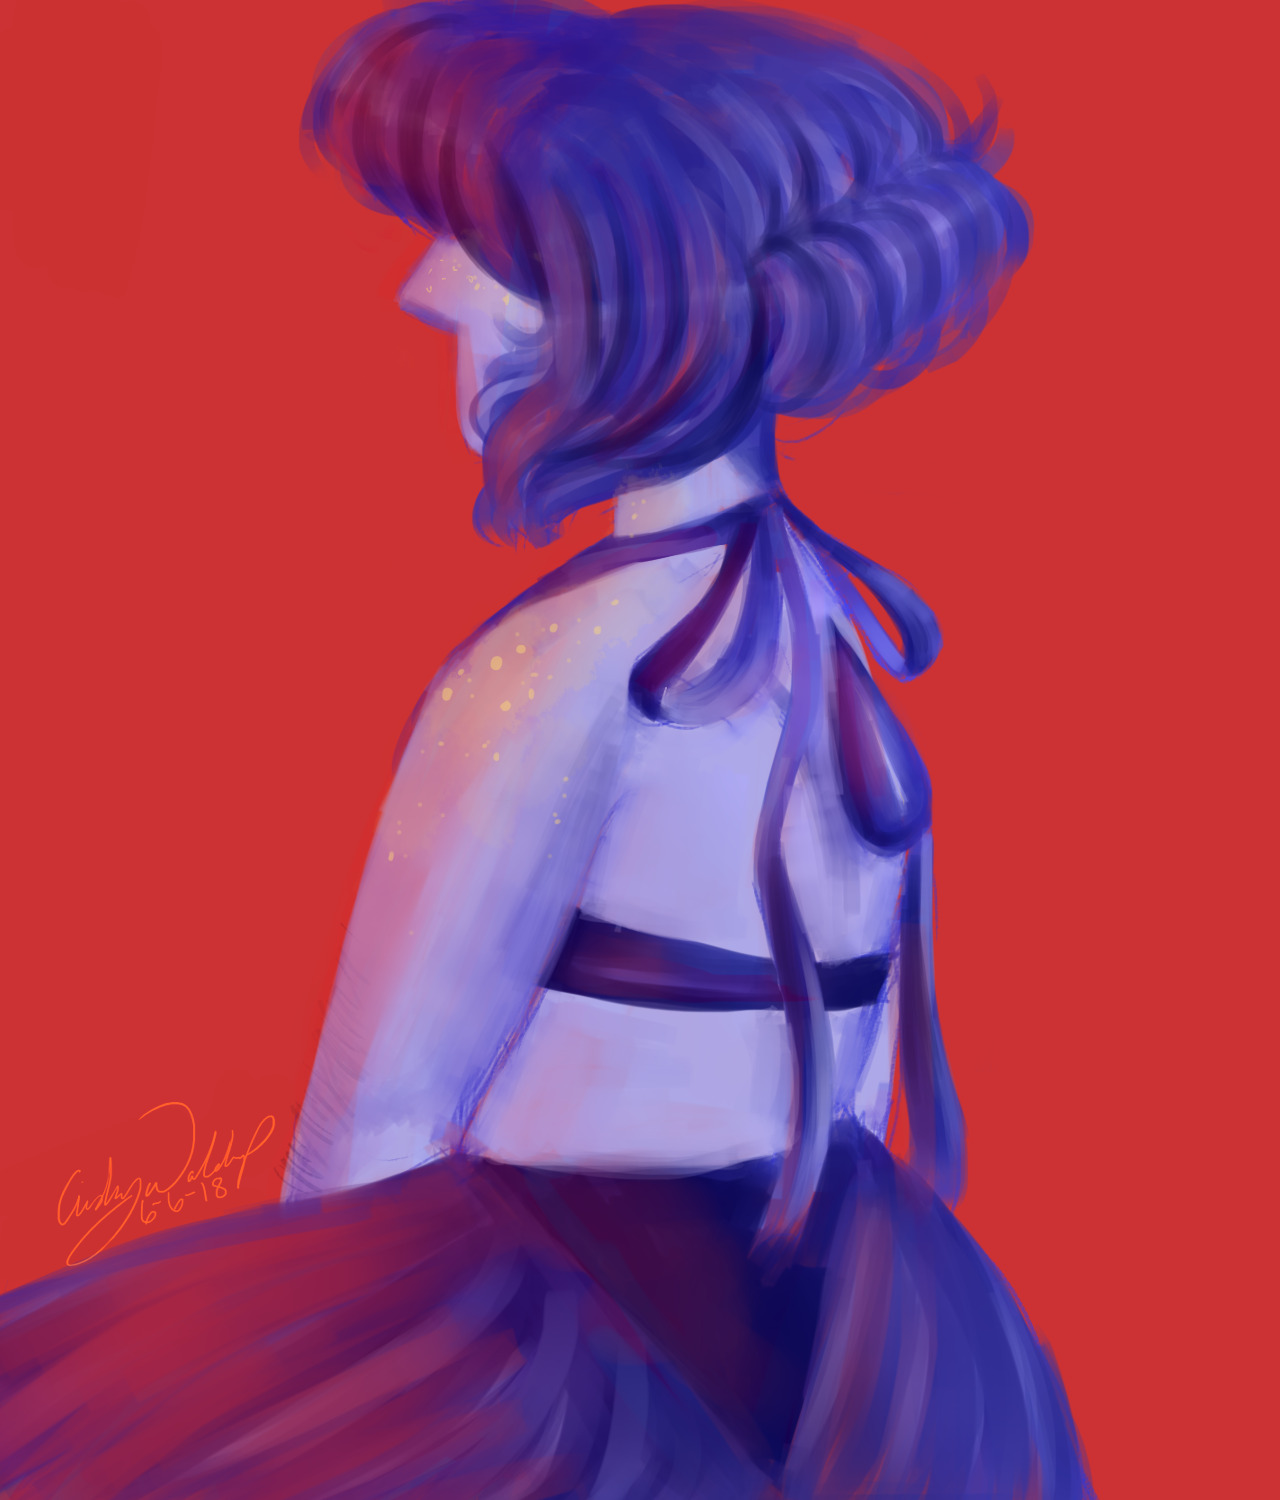 Hey Remember That One Scene Where Lapis Had Really Cool Red Lighting? yeah me too